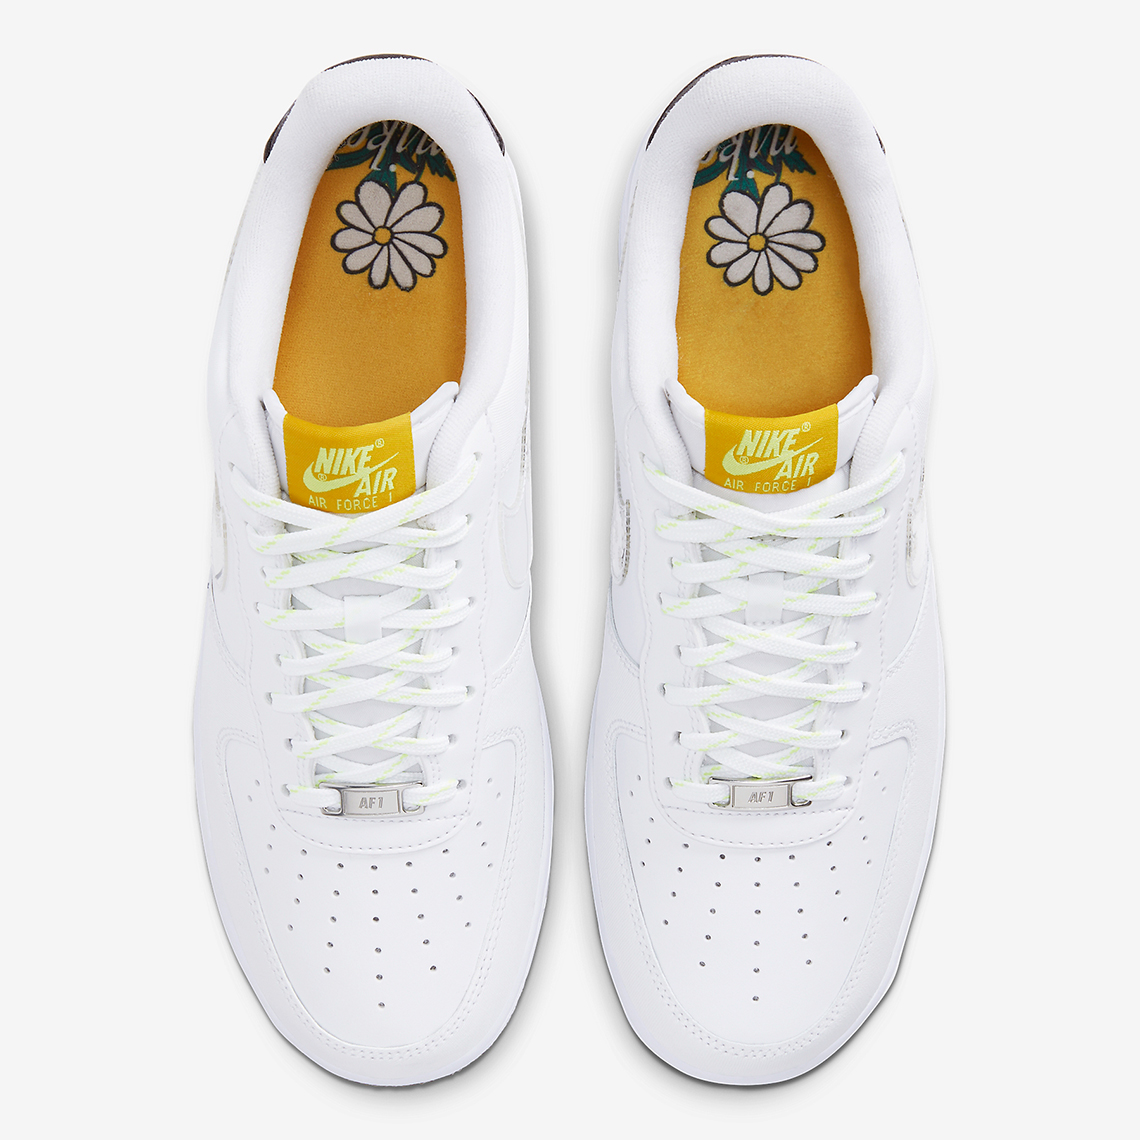 Nike Air Force 1 Low Daisy Cw5571 100 2